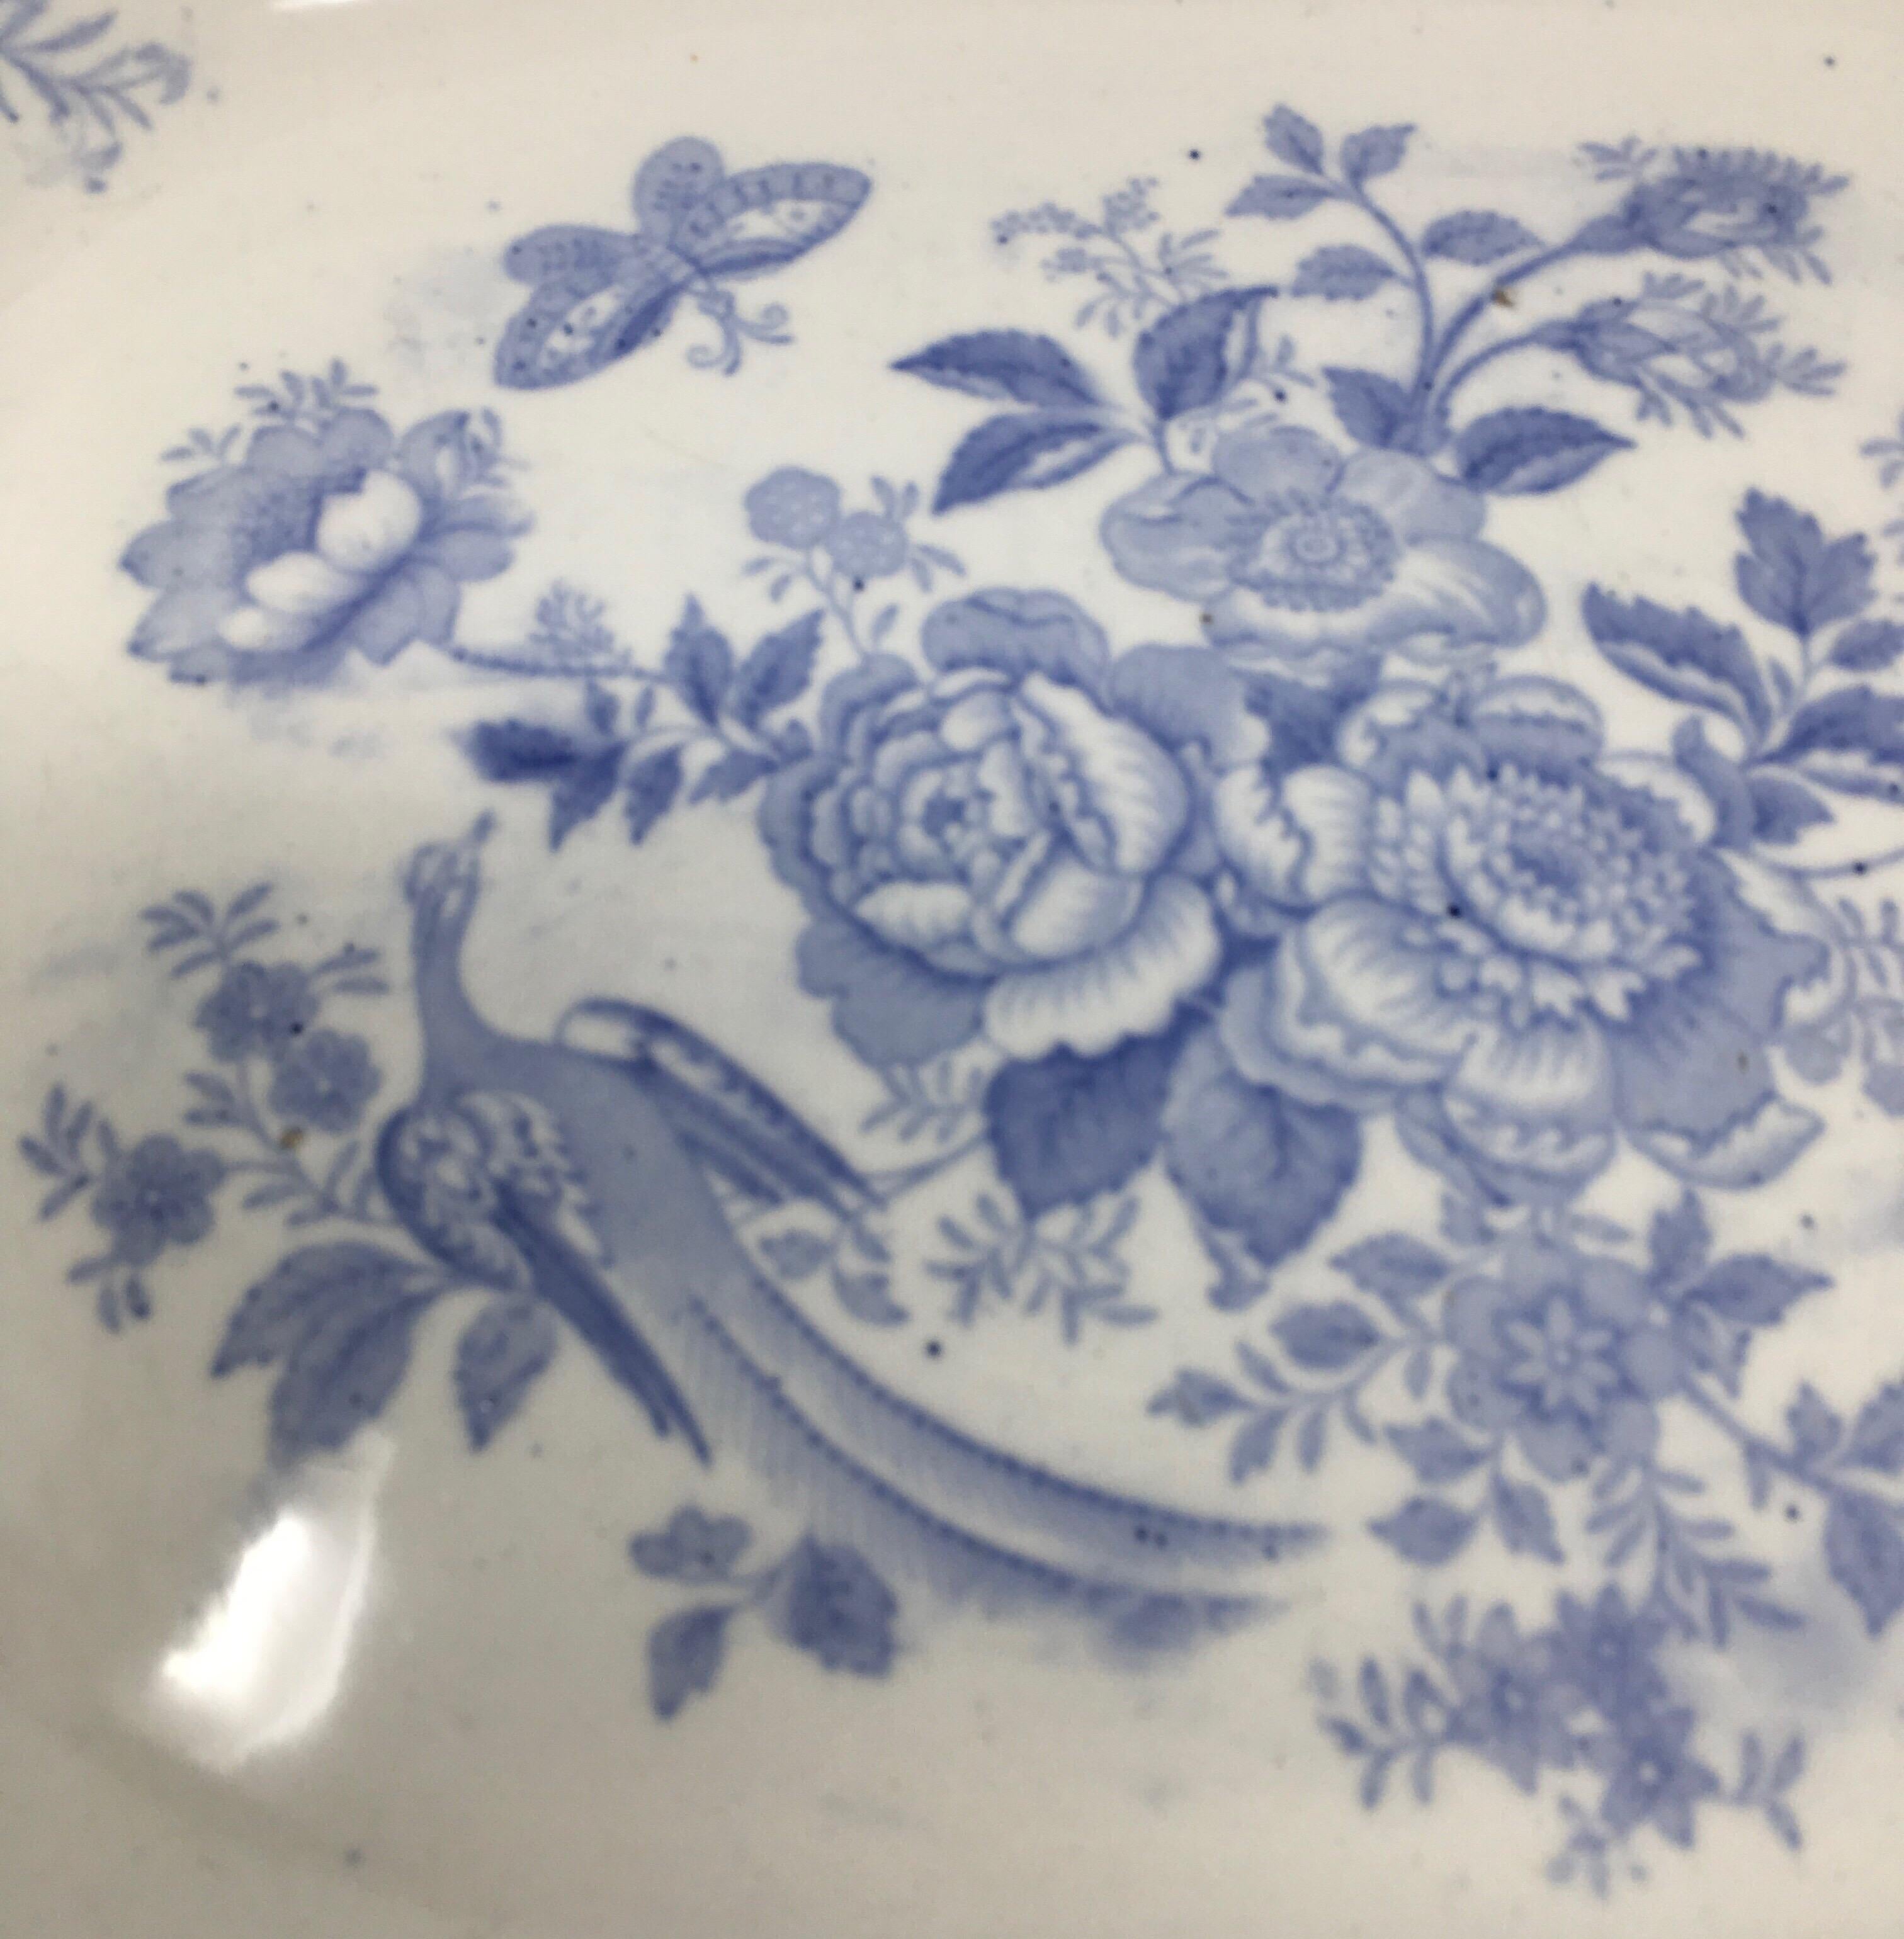 Found in England, this transfer ware platter is in the pattern of Asiatic Pheasants. The platter is in the traditional pale blue and white color palette and bears the makers mark on the underside.